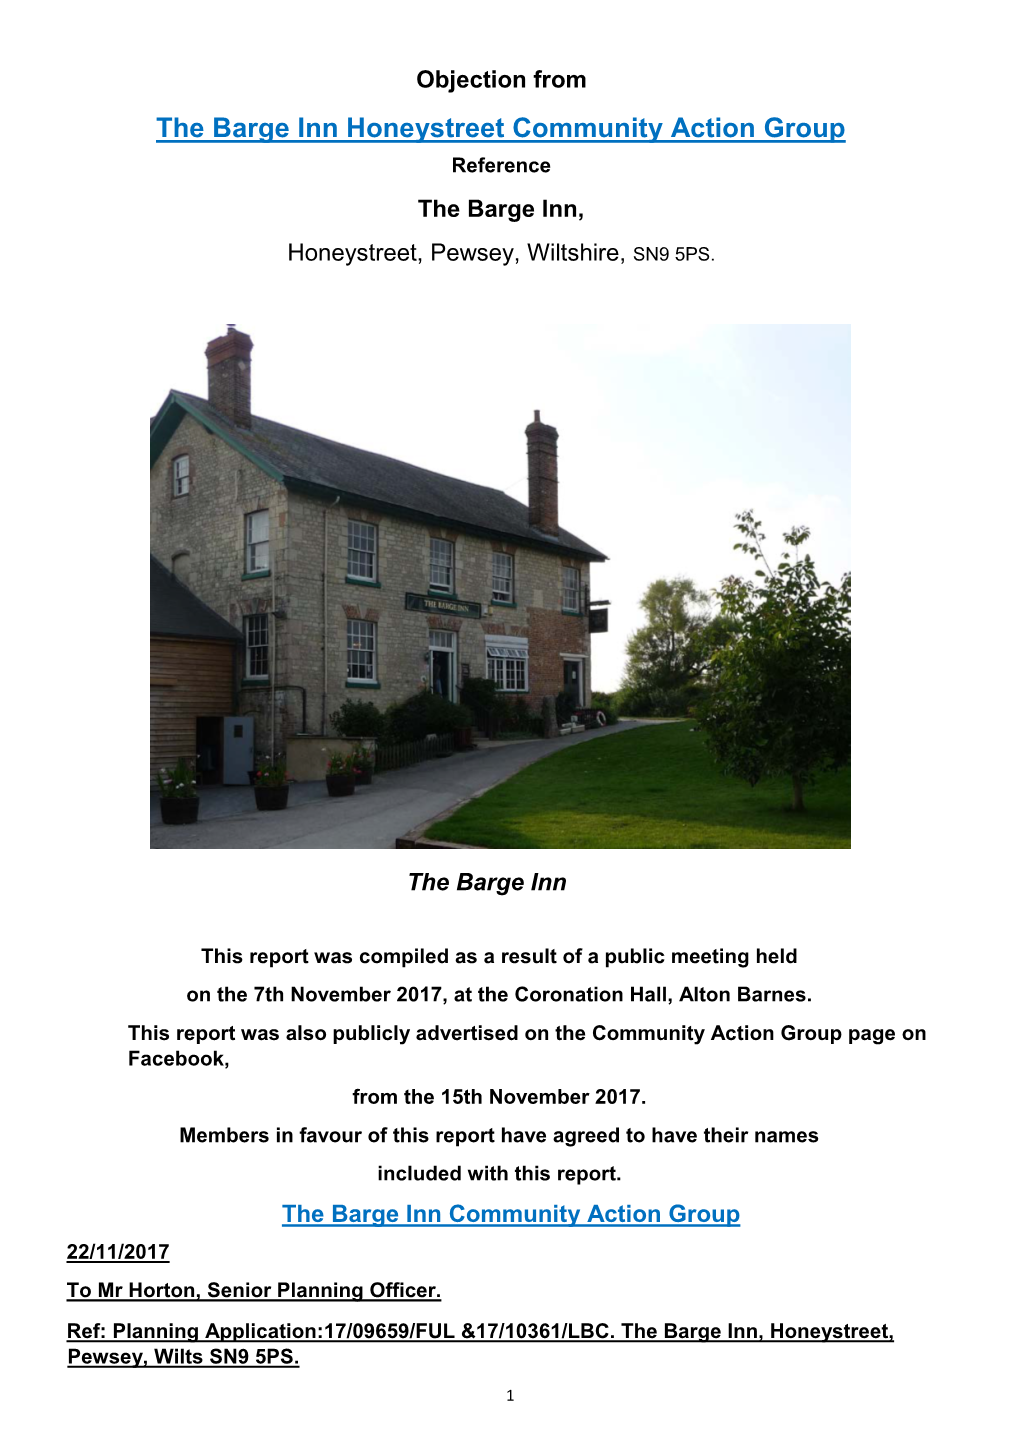 The Barge Inn Honeystreet Community Action Group Reference